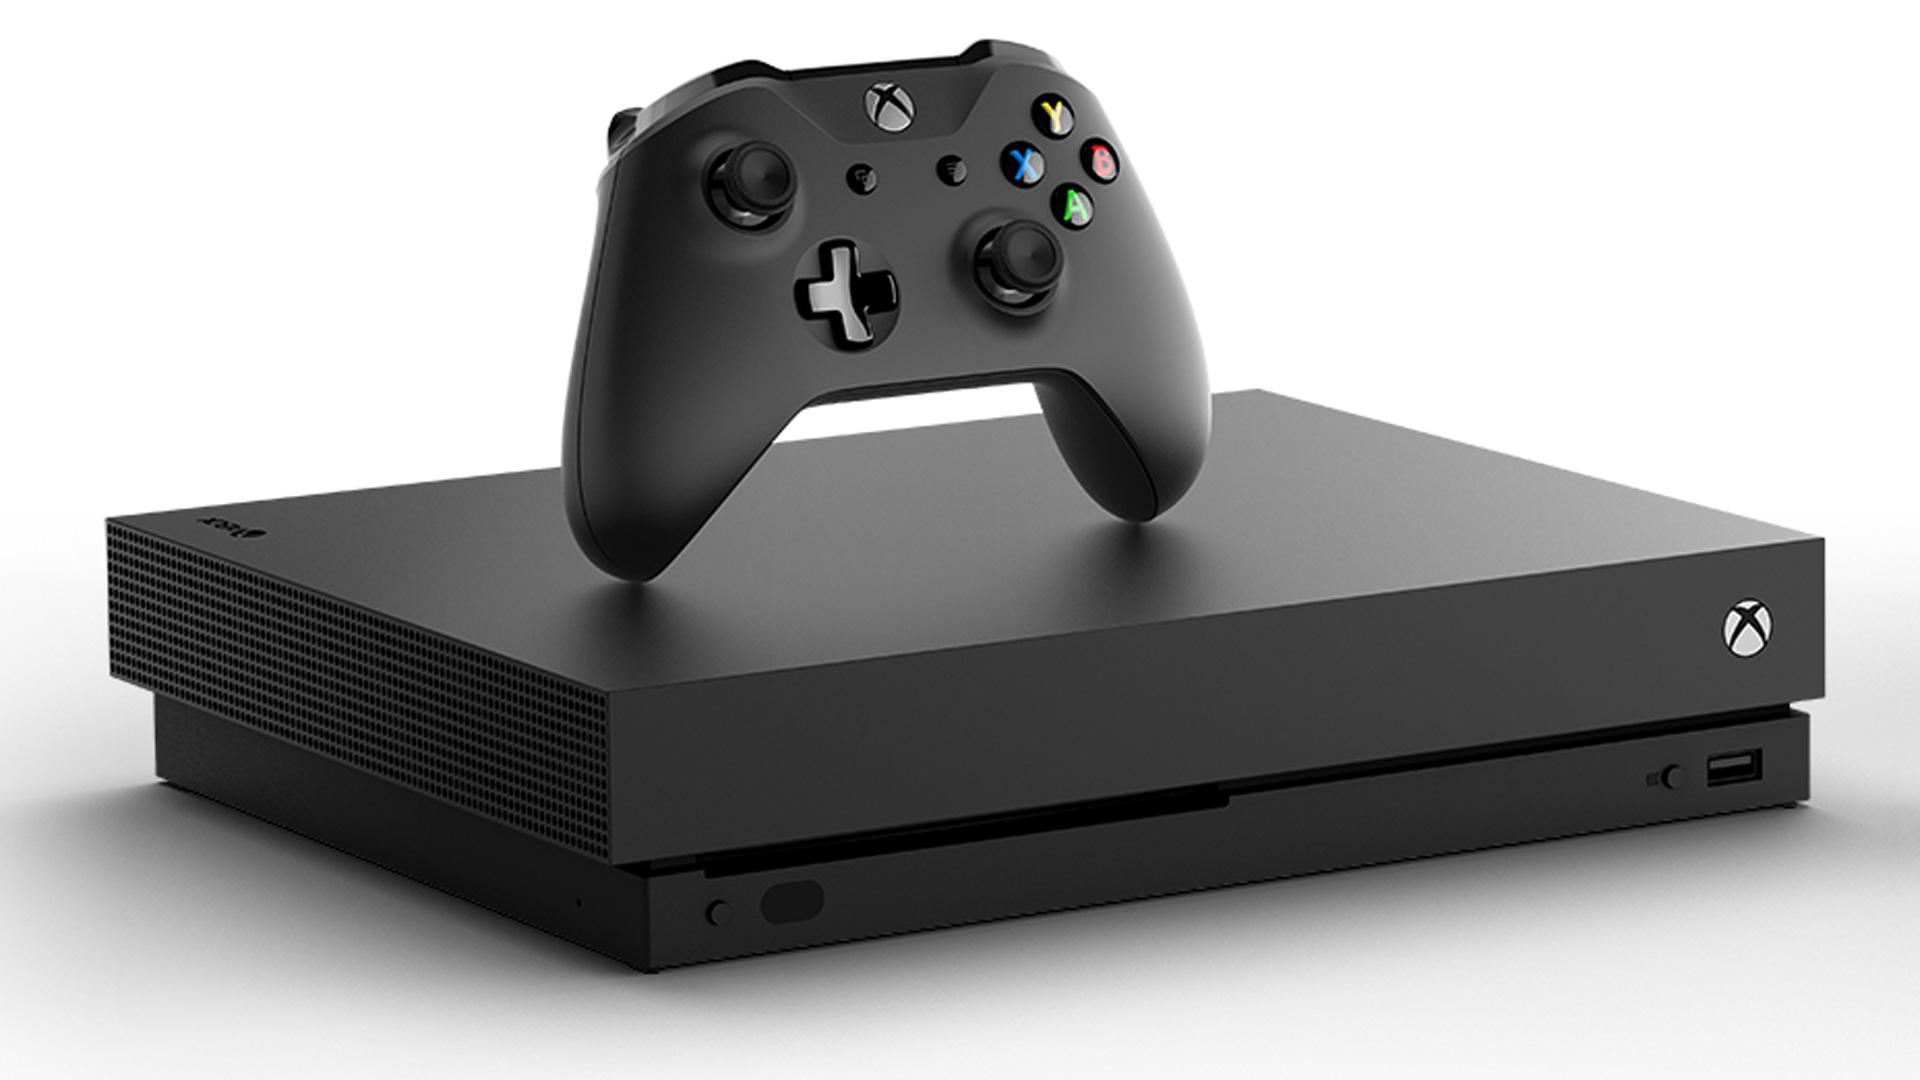 Xbox One manufacturing discontinued, Microsoft confirms - Polygon